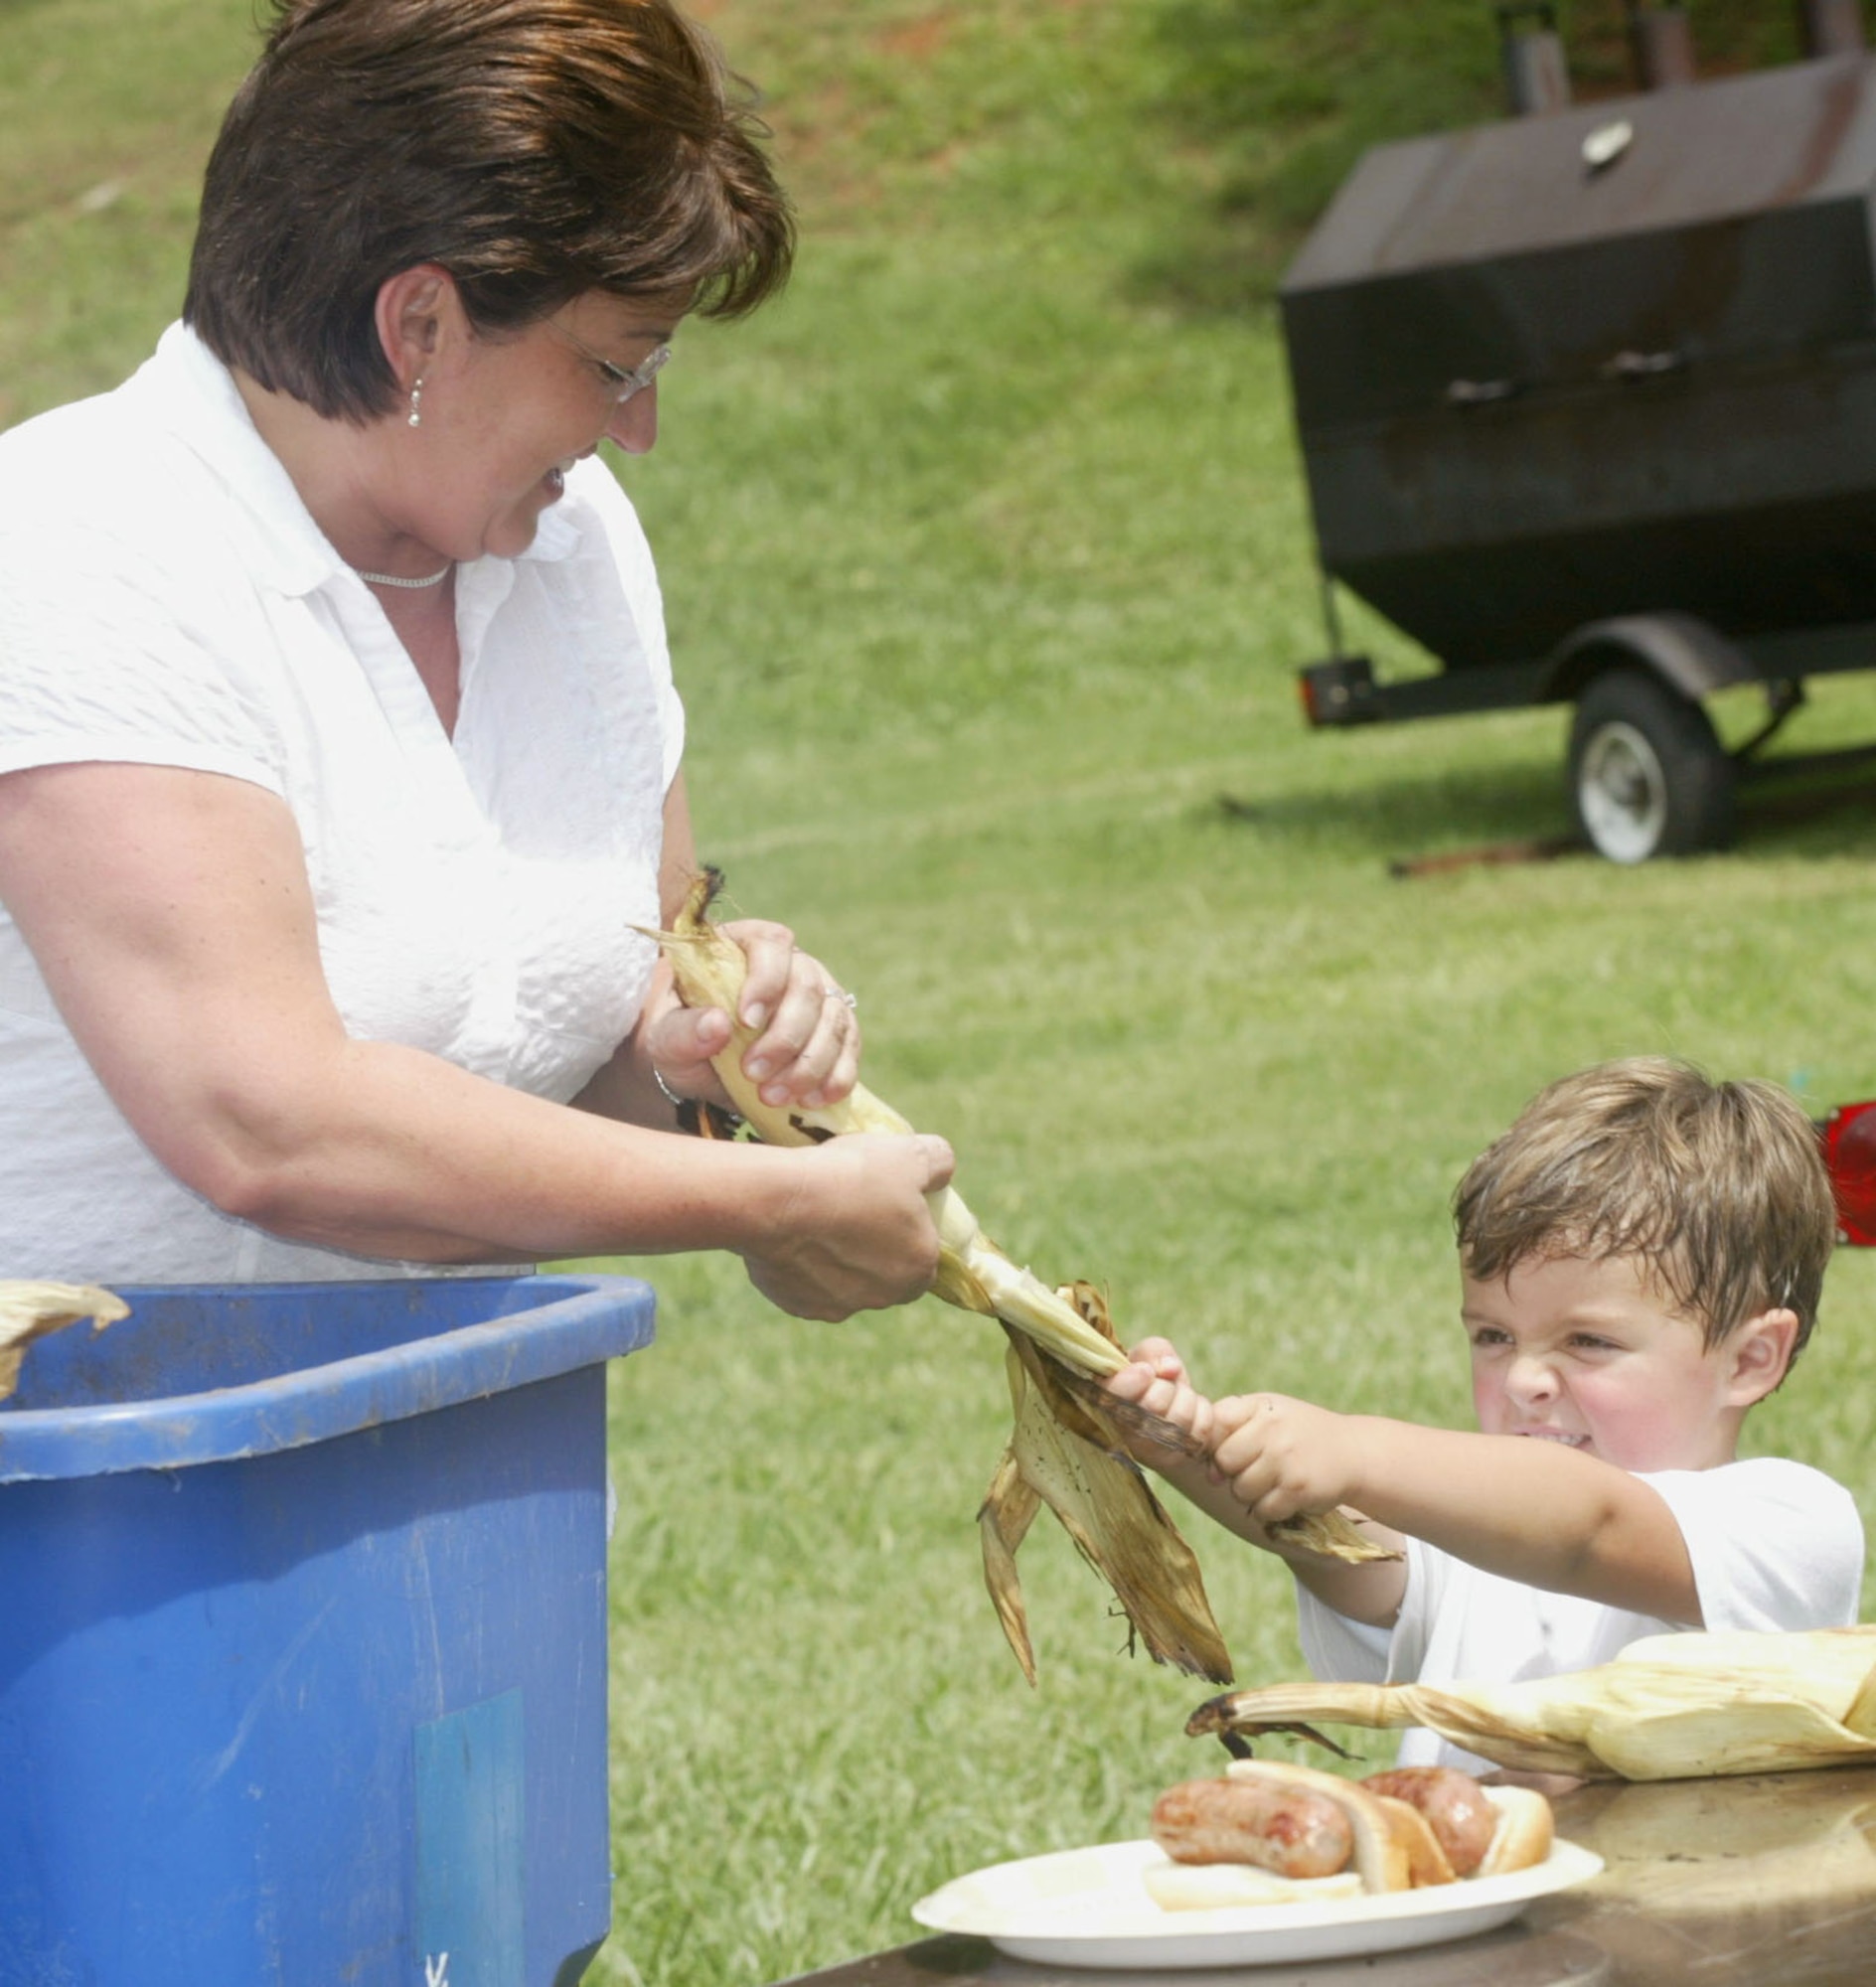 A young attendee of the annual Corn and Sausage Roast at Dobbins Air Reserve Base, Ga., has a little trouble with his shucking. The event, put on by the Dobbins Square and Compass Club and manned with volunteers from the Chiefs Group and Family Support, raised more than $2,000 for Family Support's emergency funds. More than 400 ears of grilled corn were consumed. (U.S. Air Force photo/Don Peek)